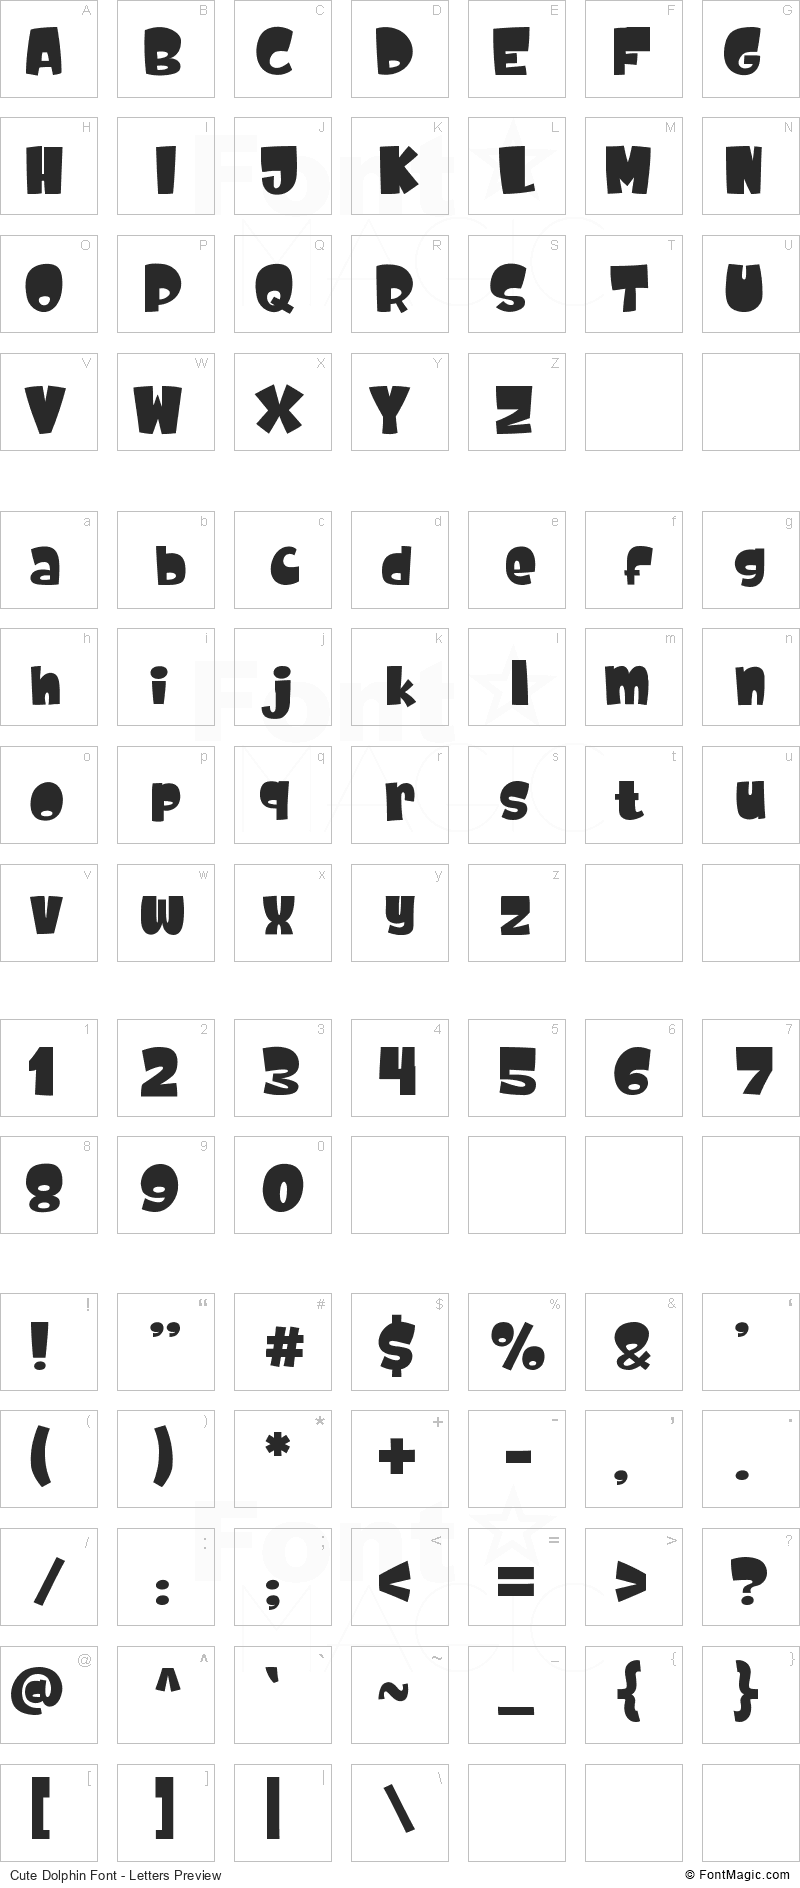 Cute Dolphin Font - All Latters Preview Chart